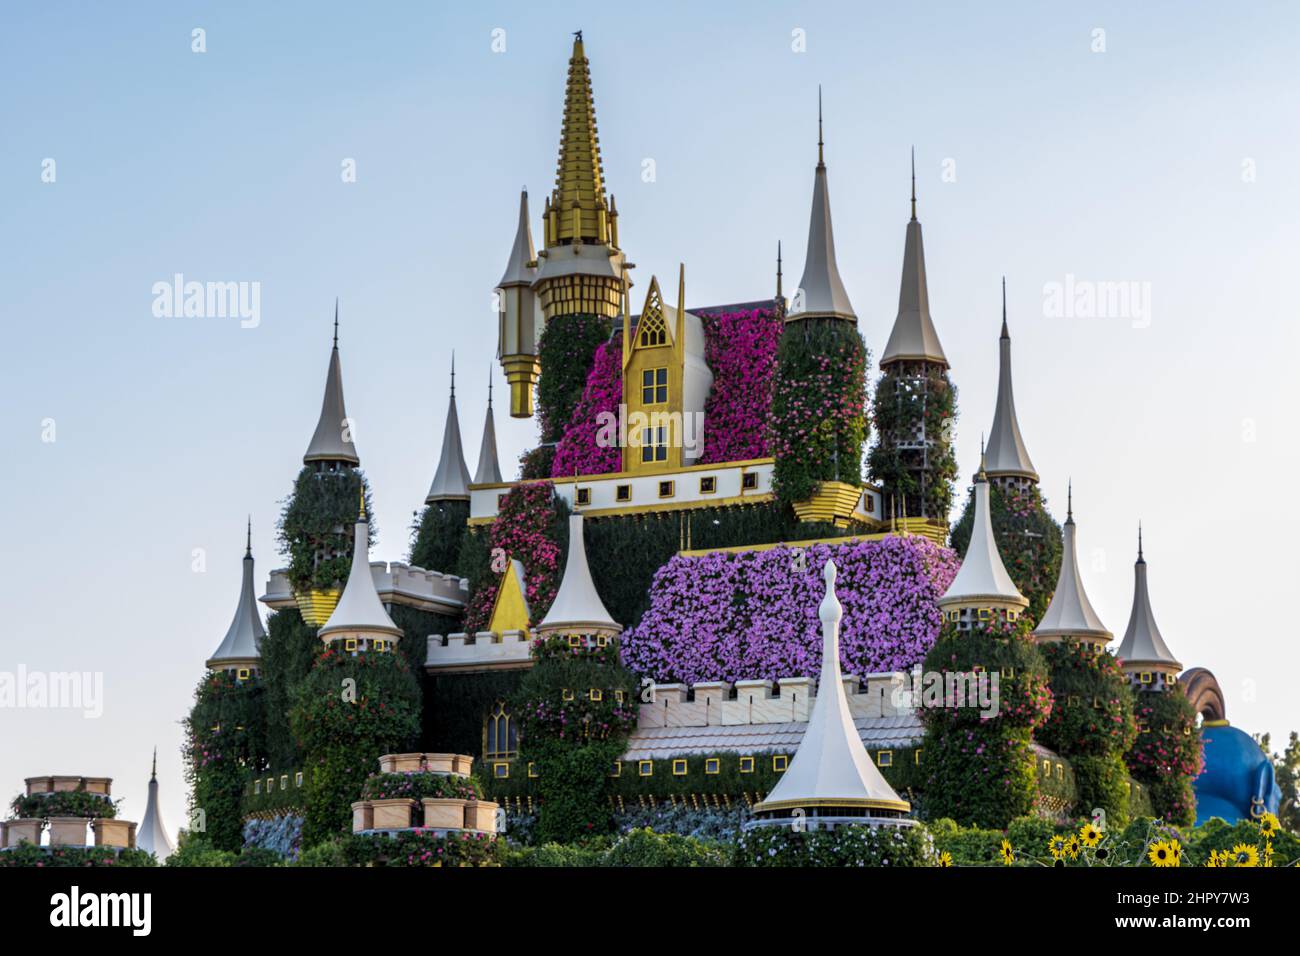 The picturesque floral fairytale castle at the Dubai Miracle Garden, United Arab Emirates. Stock Photo